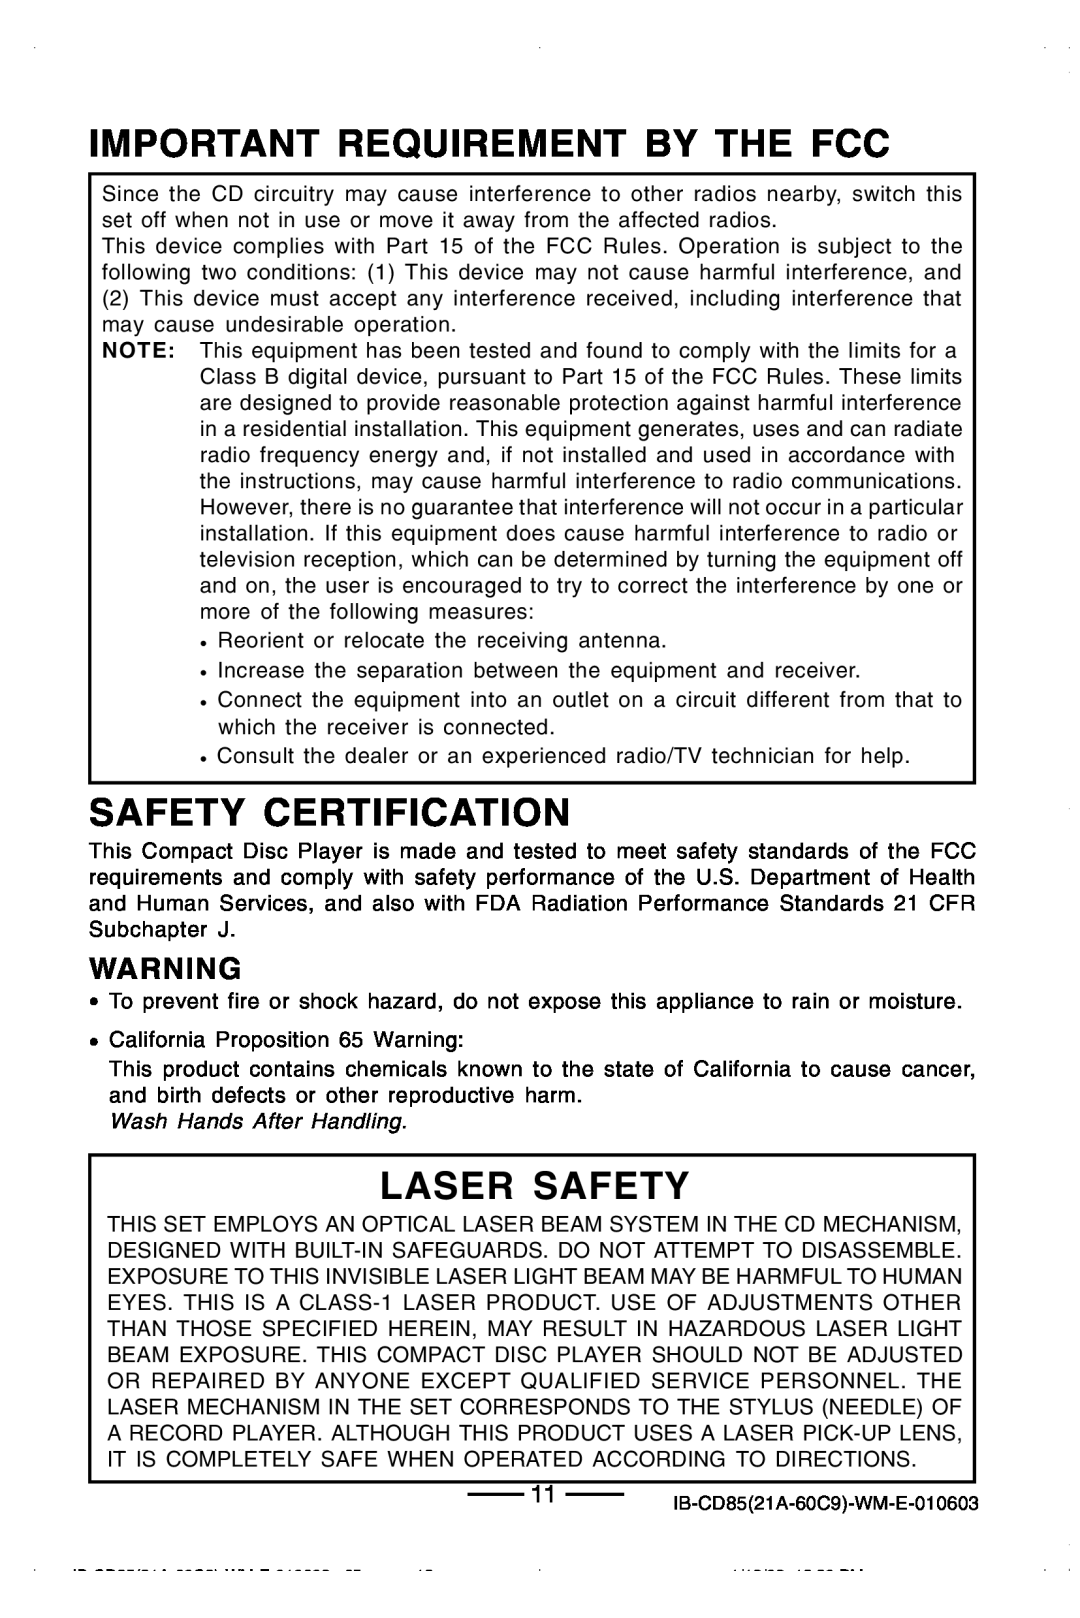 Lenoxx Electronics CD85 manual Important Requirement By The Fcc, Safety Certification, Laser Safety 